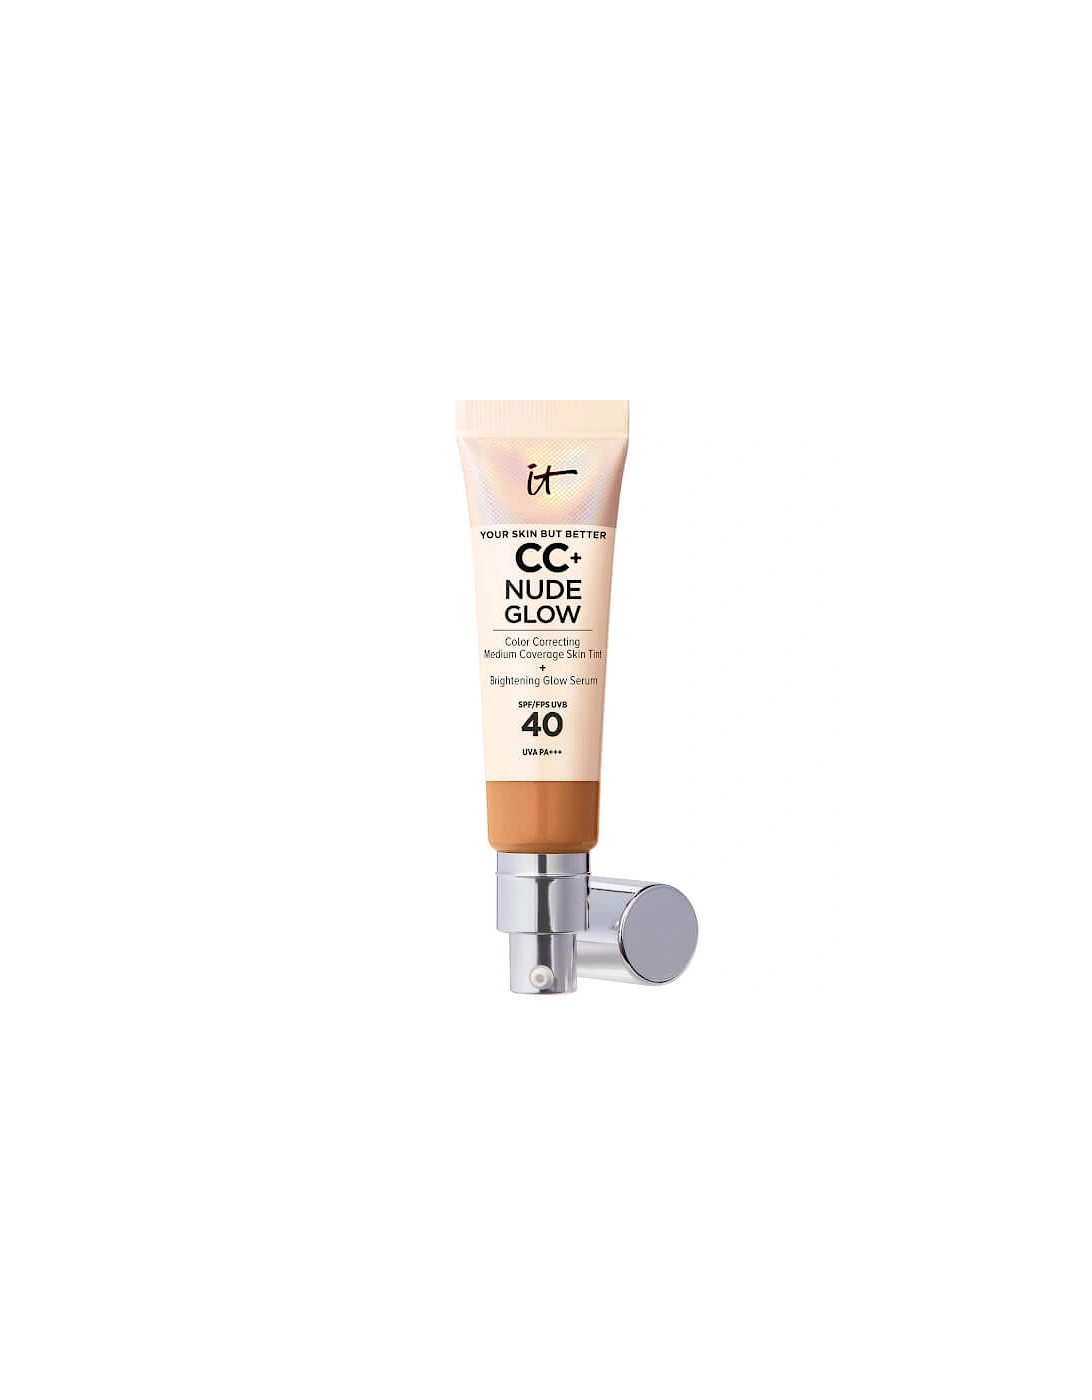 CC+ and Nude Glow Lightweight Foundation and Glow Serum with SPF40 - Tan, 2 of 1